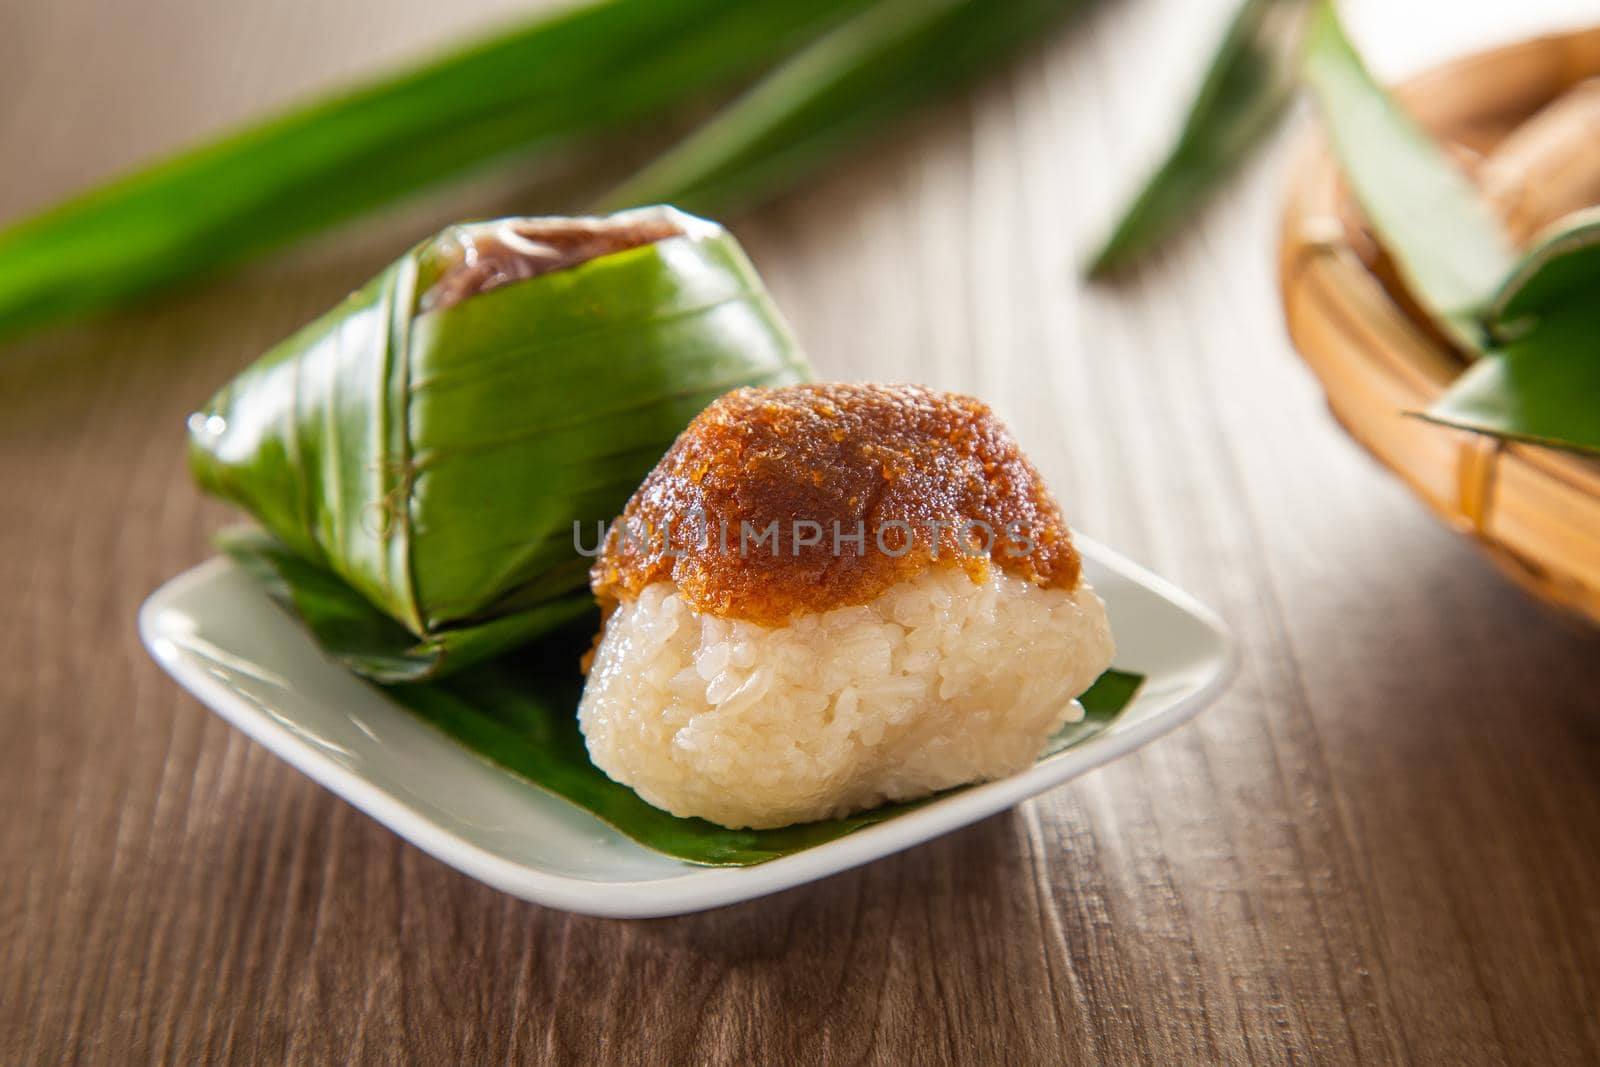 Kuih Pulut inti, traditional Malaysian Nyonya sweet dessert. It is made of steamed glutinous rice with coconut milk and eaten with coconut filling. by tehcheesiong